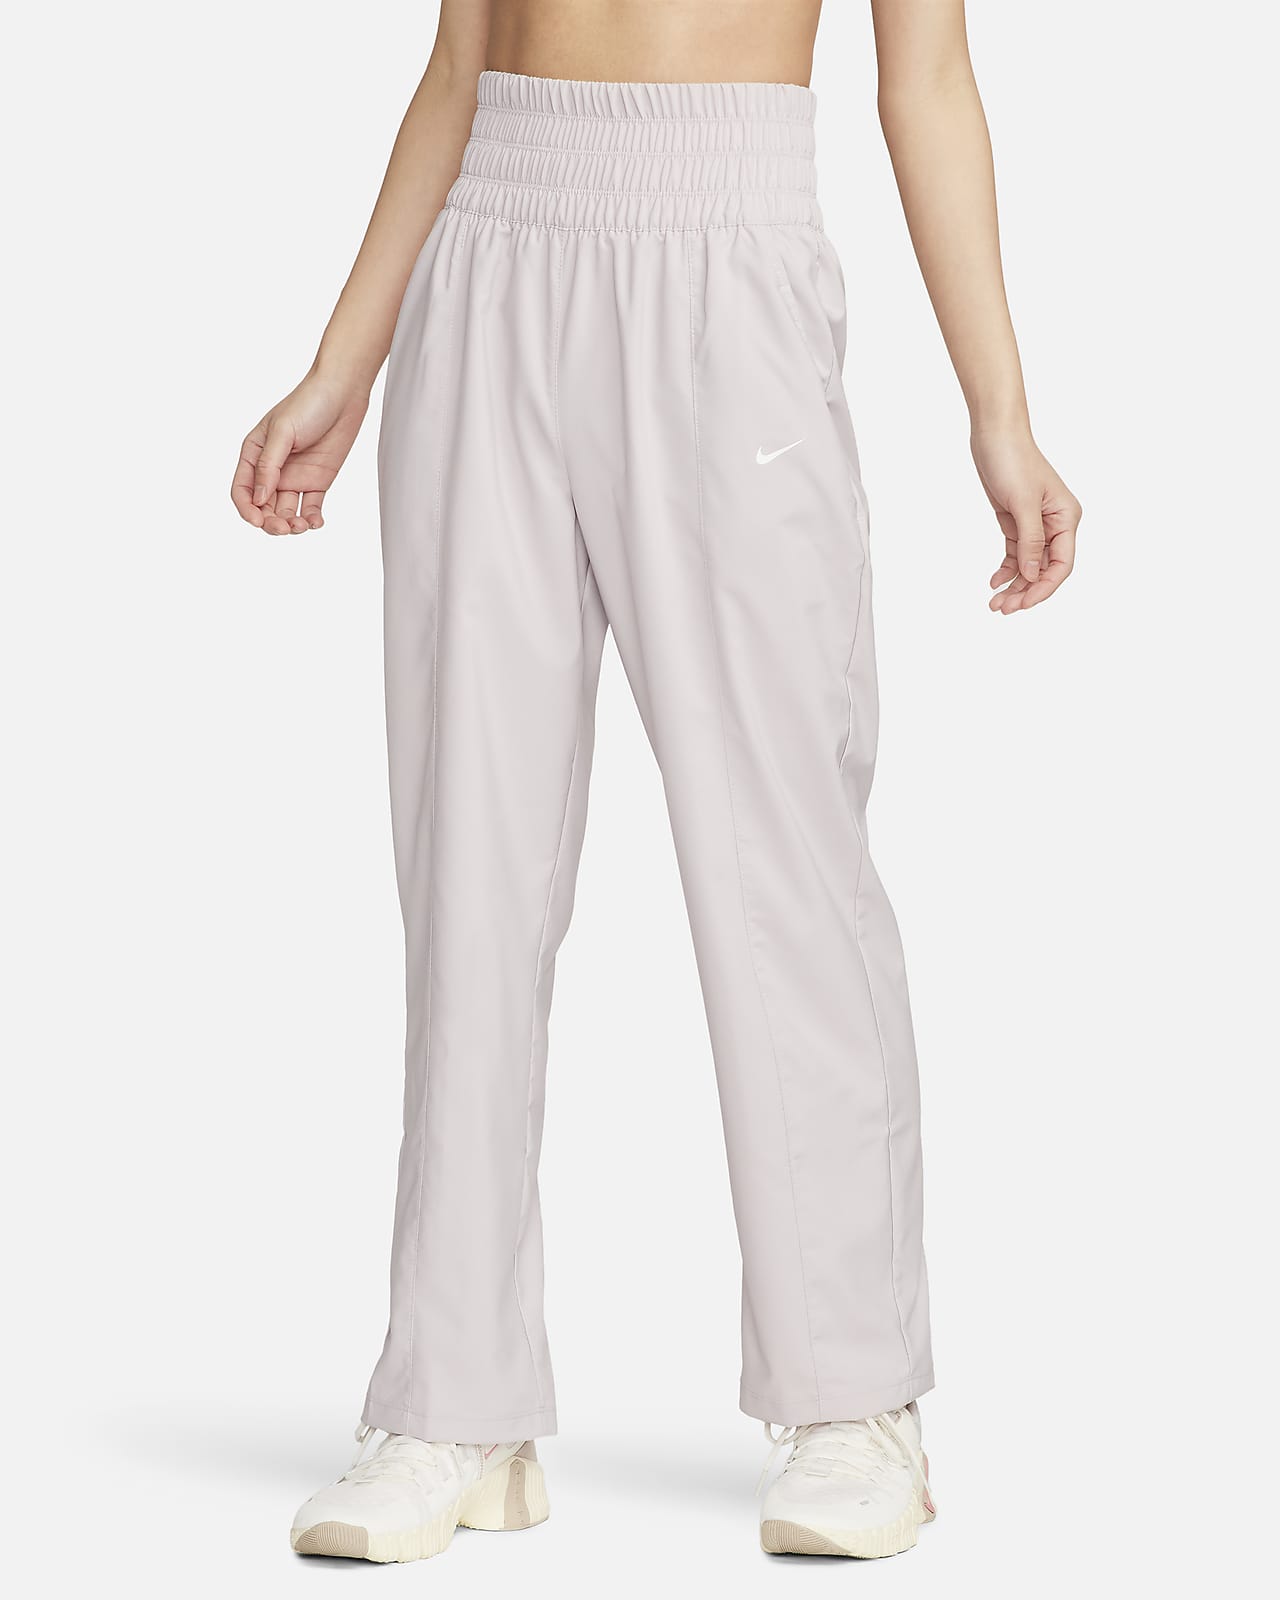 Clay White High Waisted Curved Pants in Garment Dyed Denim | LEMAIRE-thunohoangphong.vn